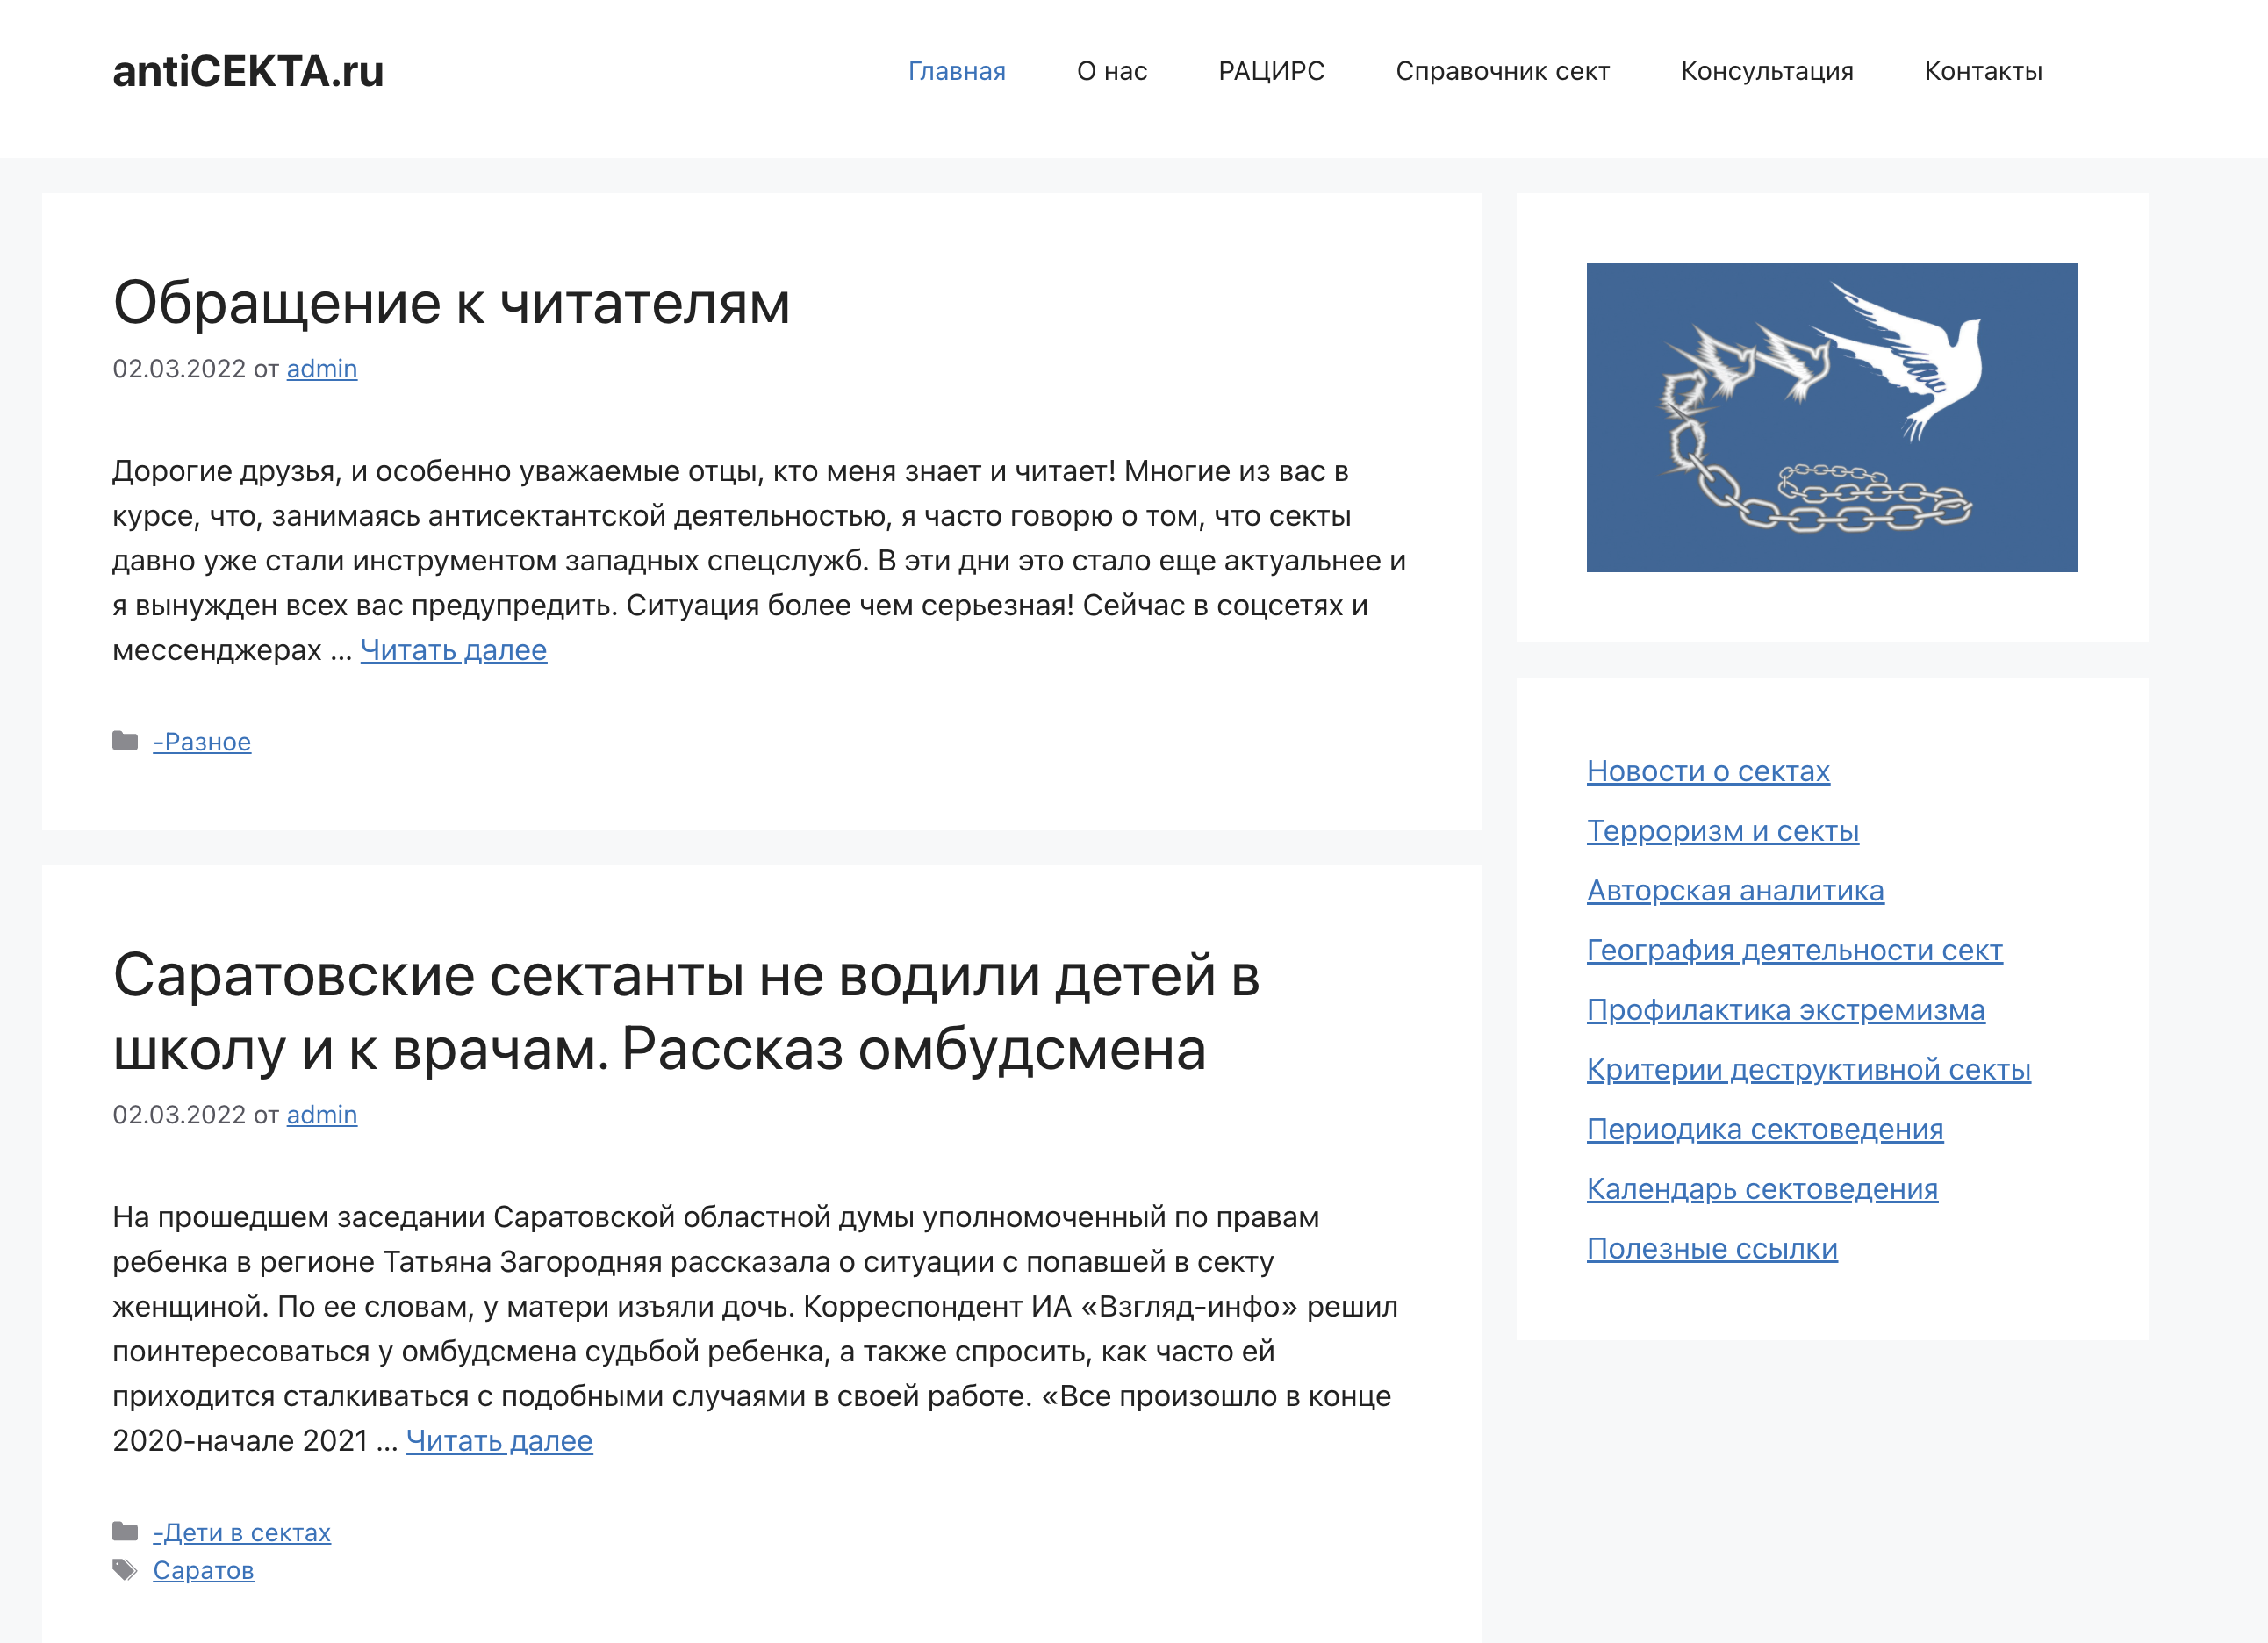 The Website of the FECRIS group The Saratov Branch of the Center for Religious Studies